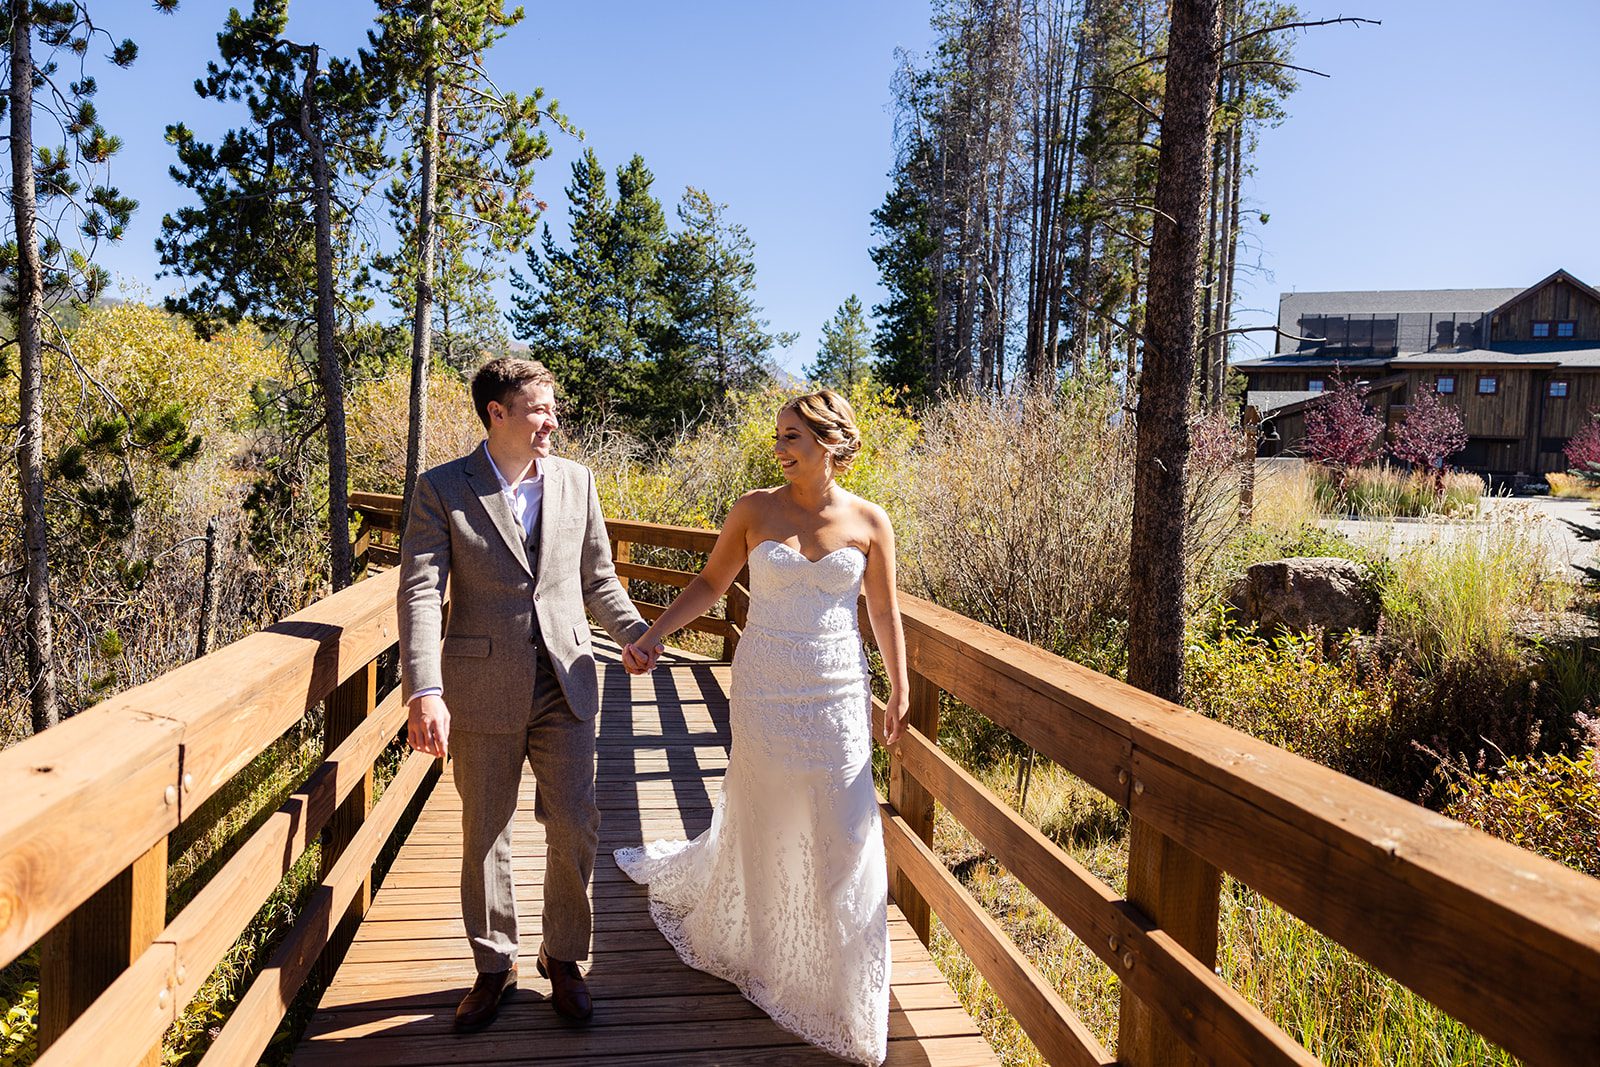 Headwaters Center Wedding first look in Winter Park Colorado Headwaters River Journey